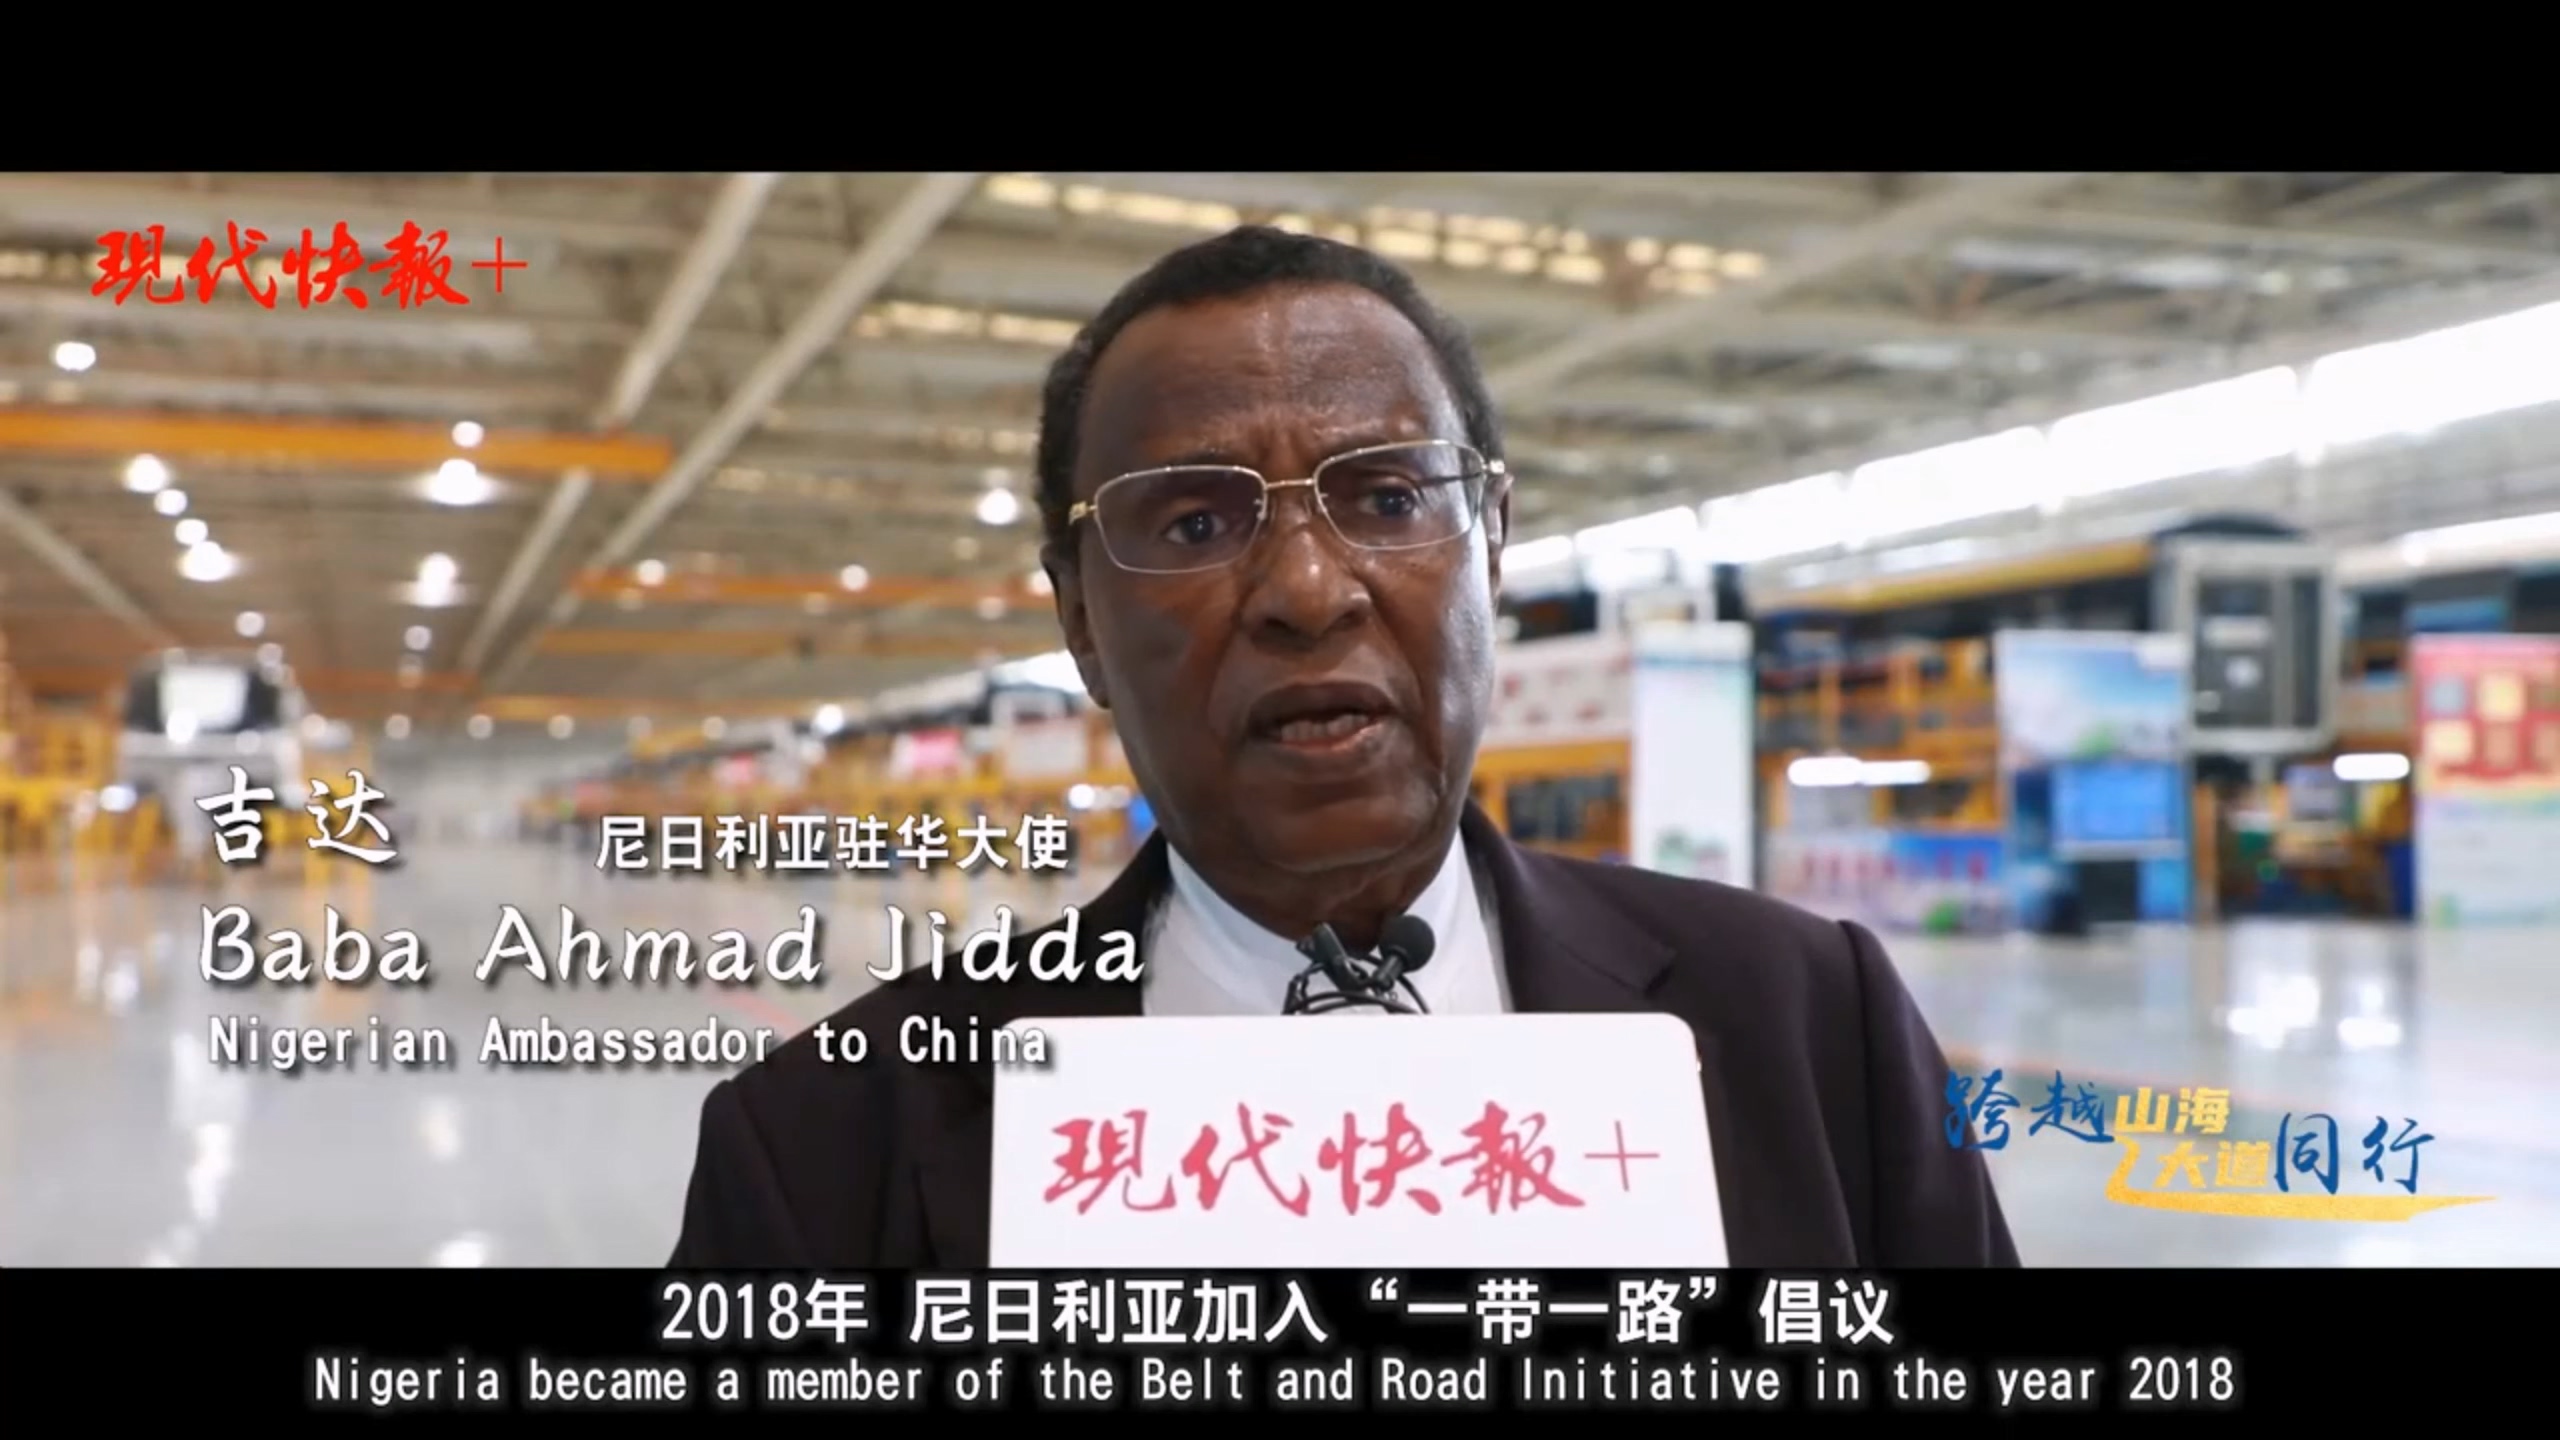 Nigerian Ambassador to China: the 10 Years Have Been Very Meaningful to Many Countries